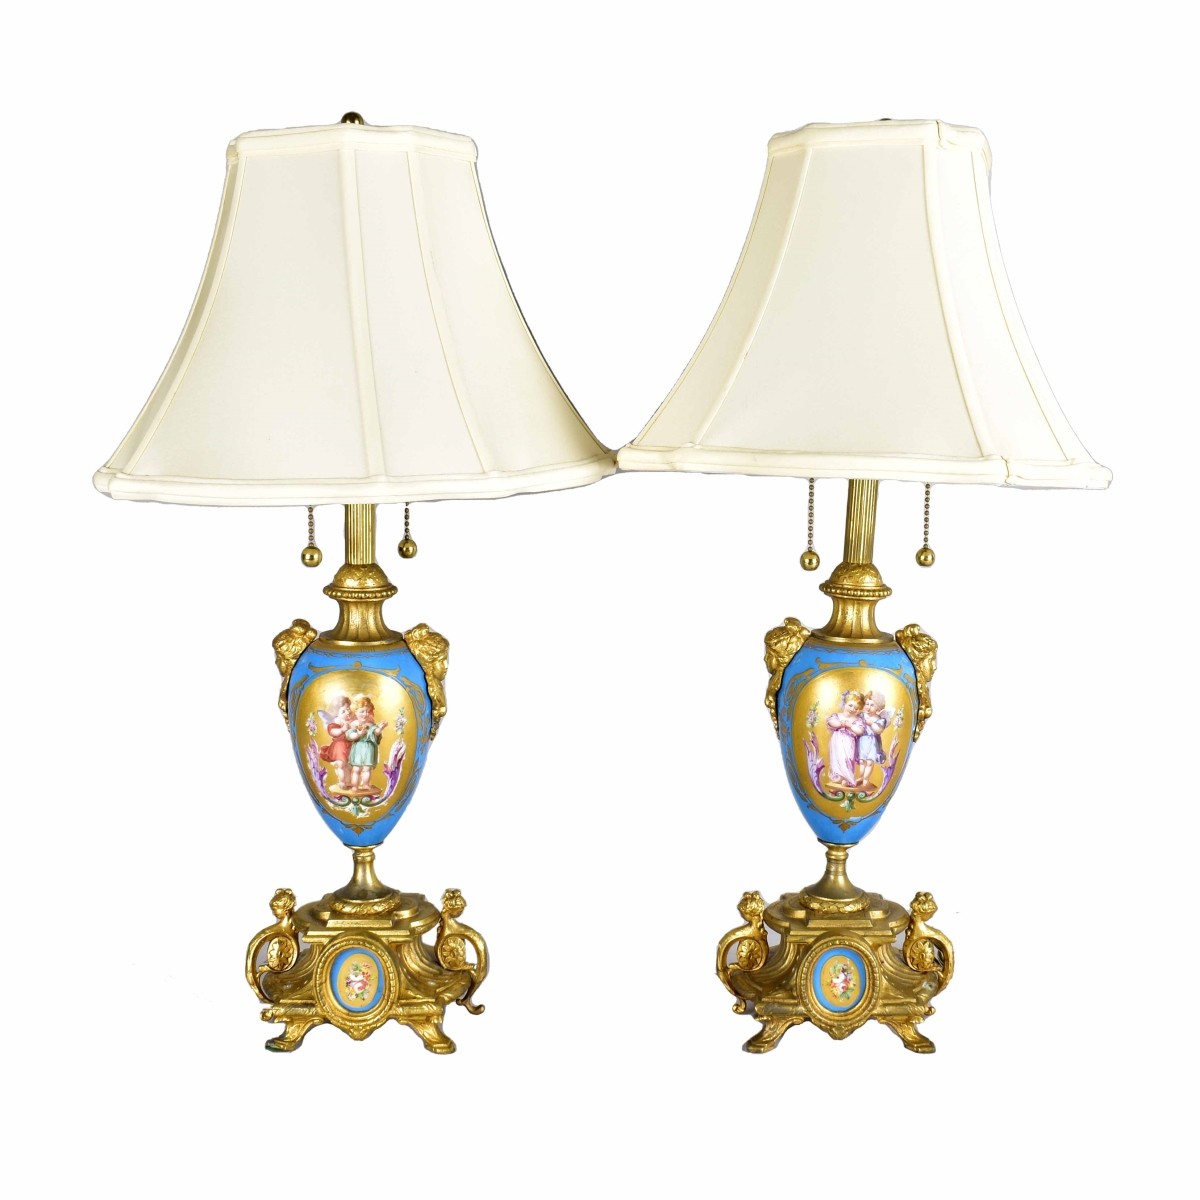 Pair of Antique Sevres Lamps